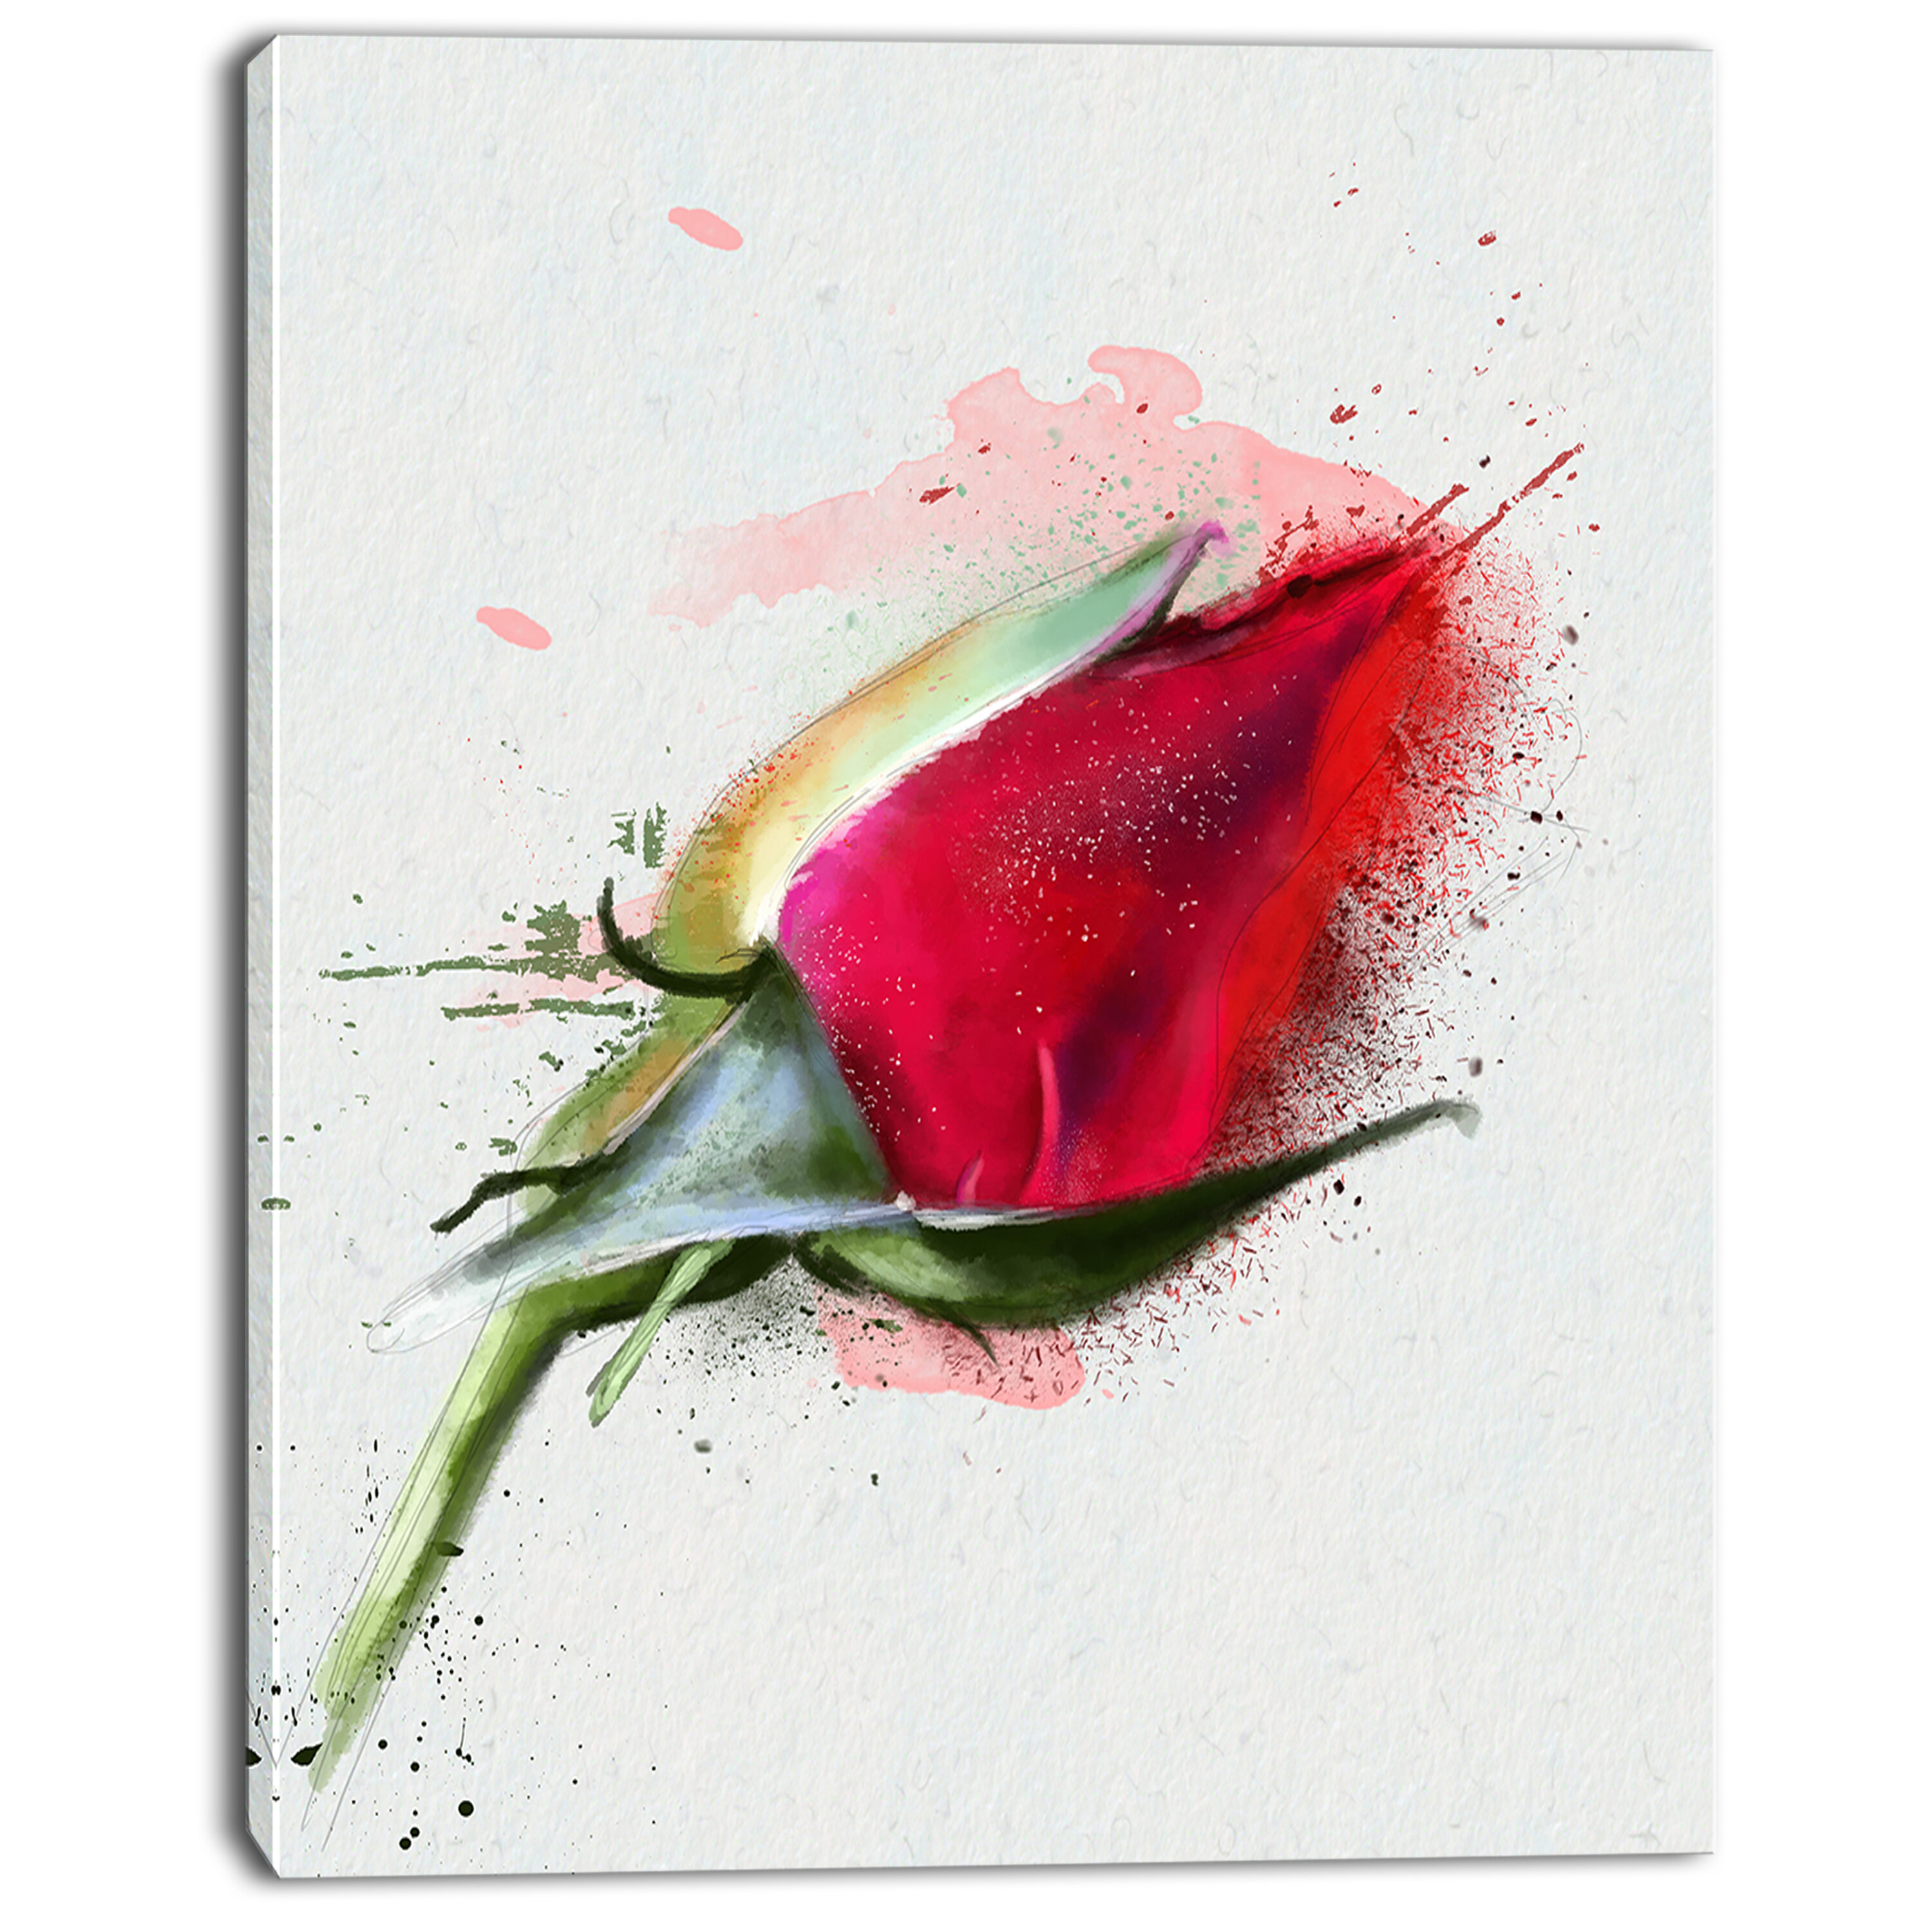 red rose watercolor painting